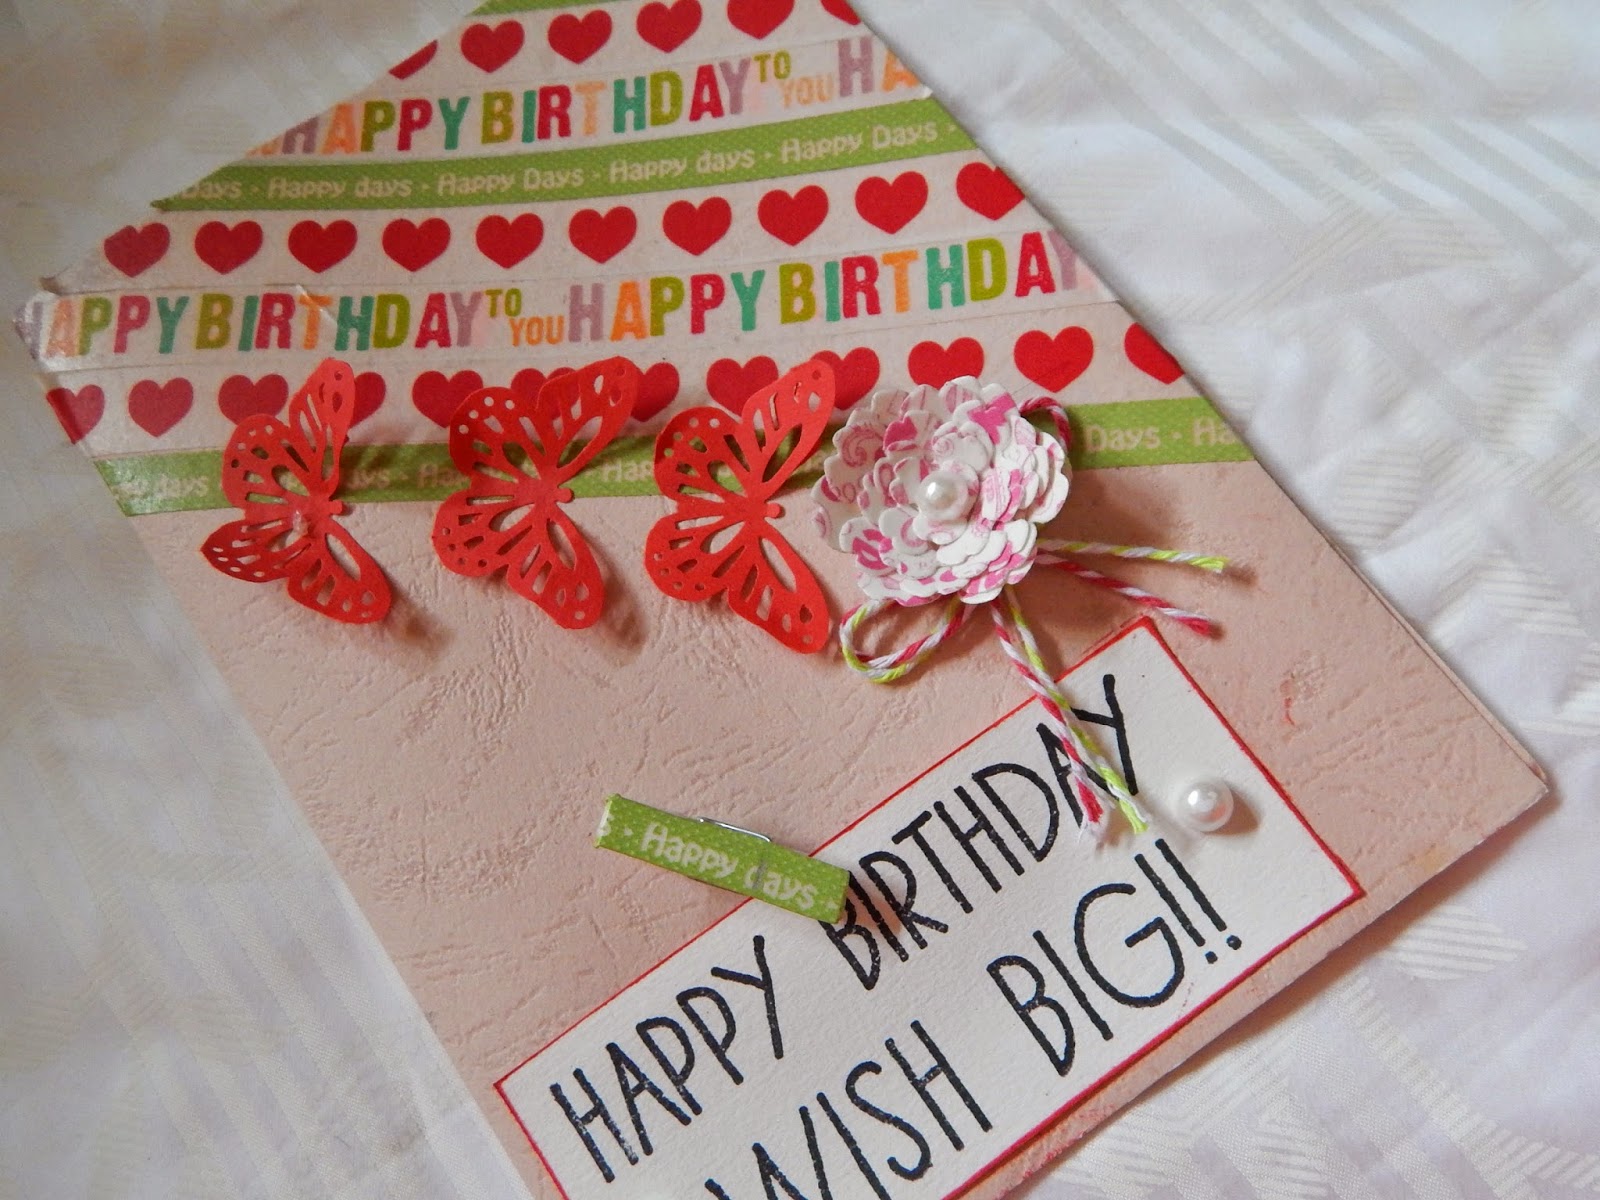 The Quill Mill Crafts Birthday Card